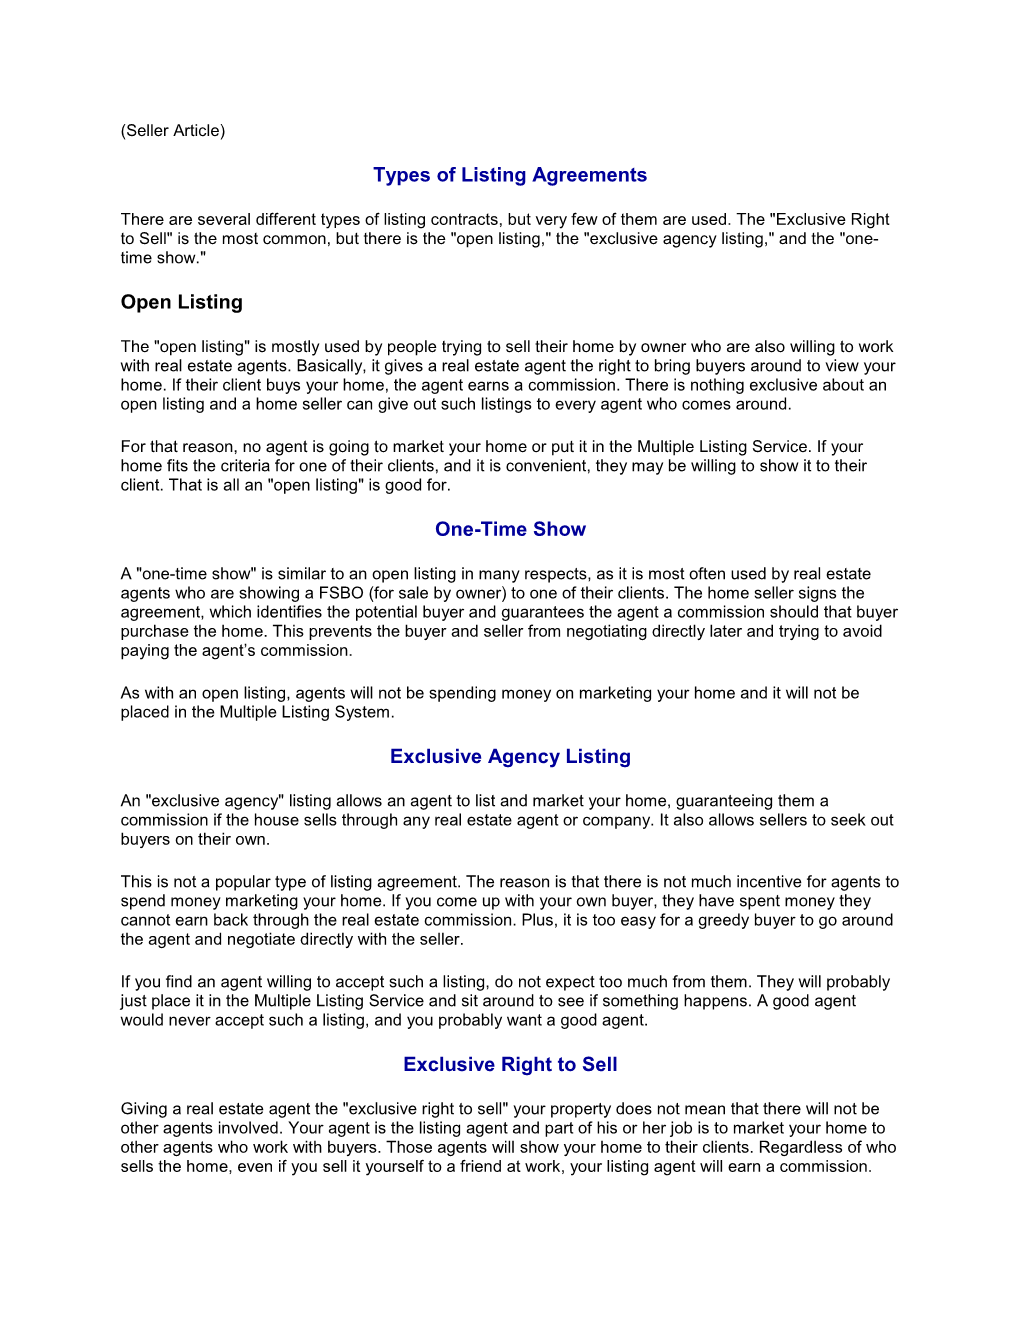 Types of Listing Agreements Open Listing One-Time Show Exclusive